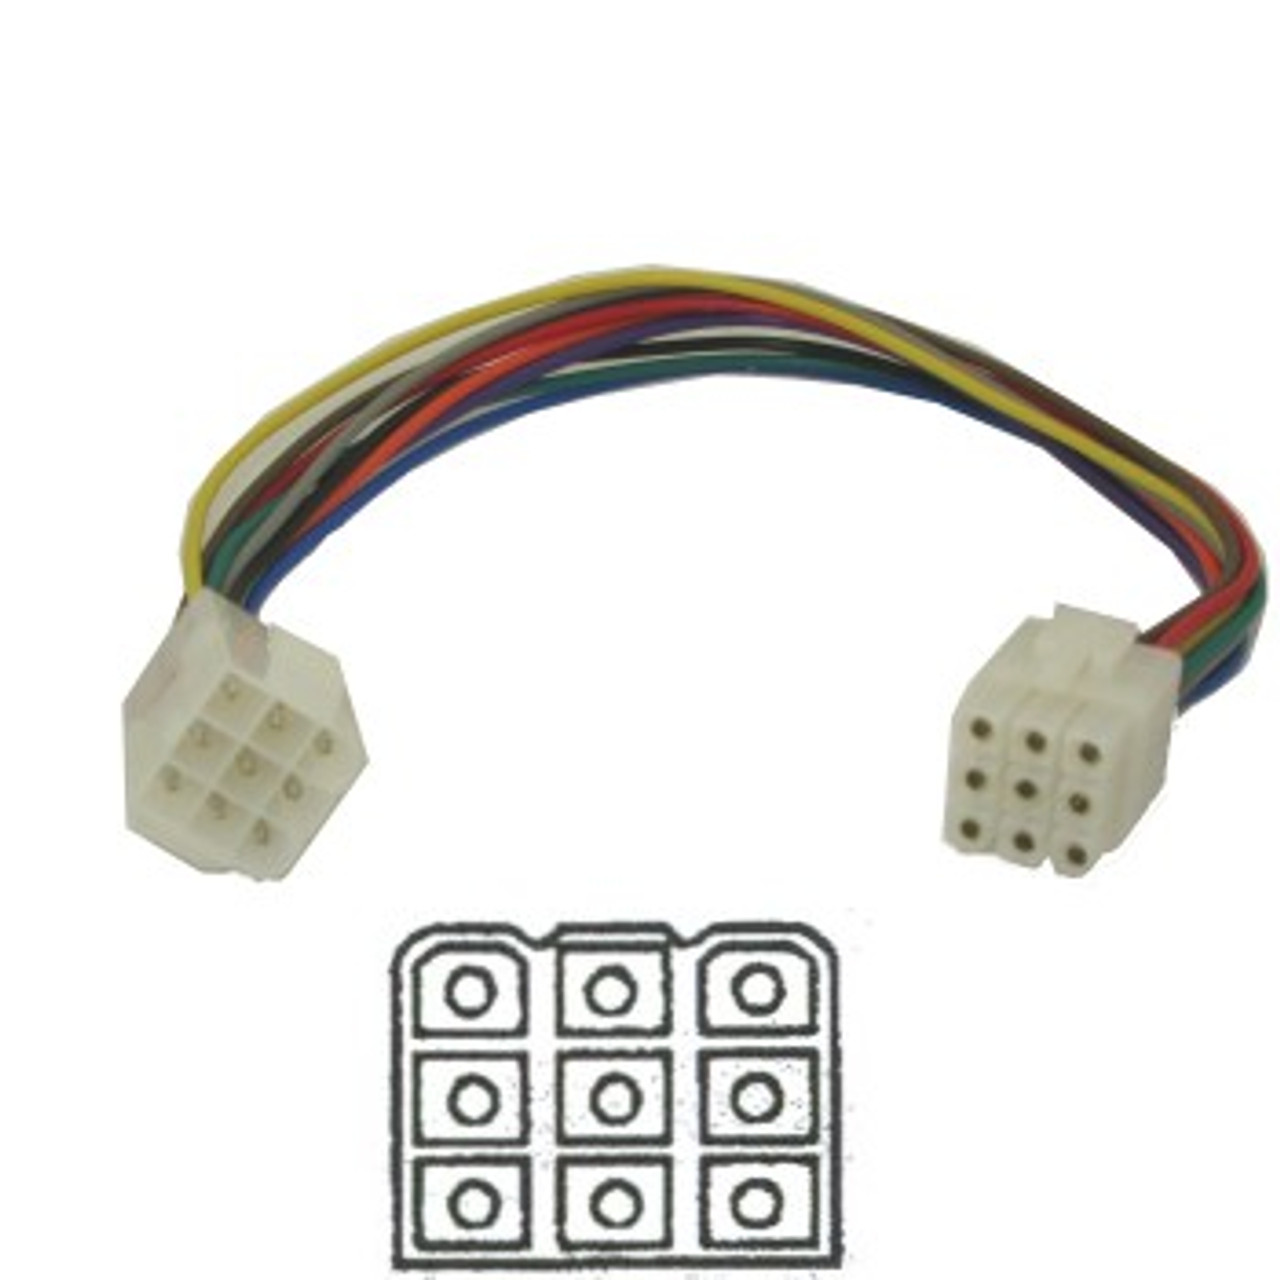 Molex-Style Mating Connector Set - 9 Pin